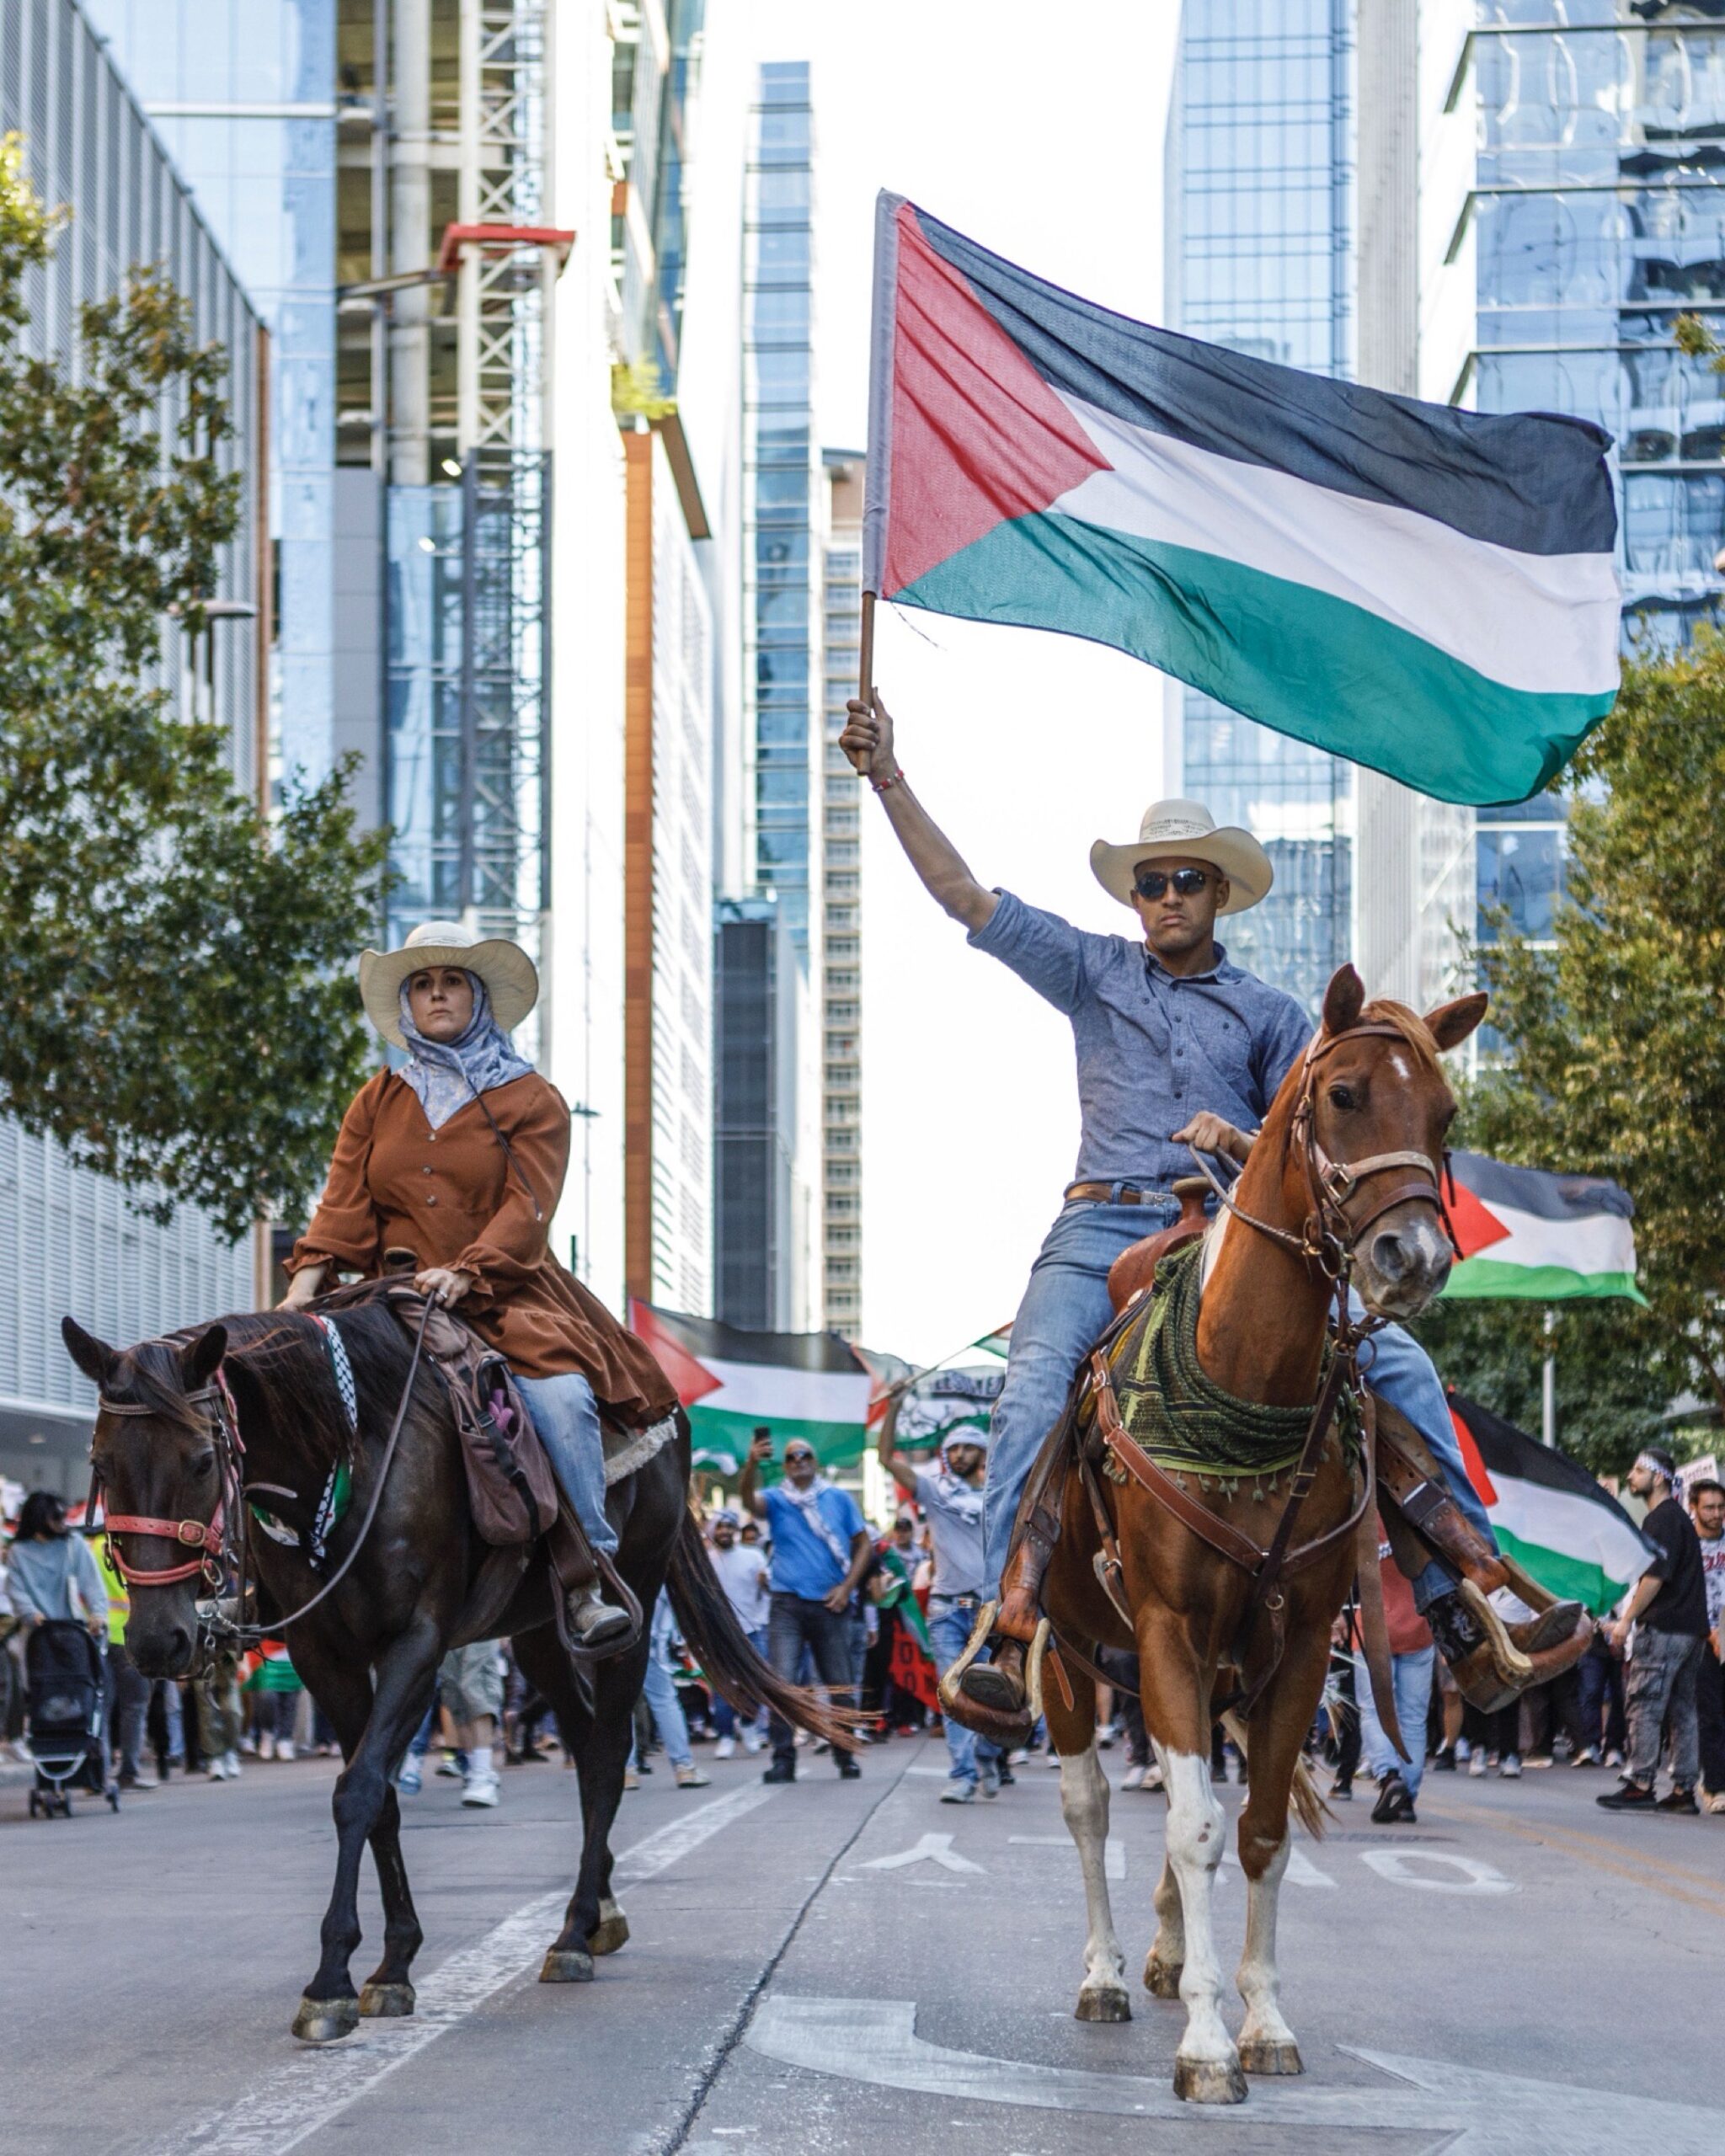 Pro-Palestinian protesters on horses